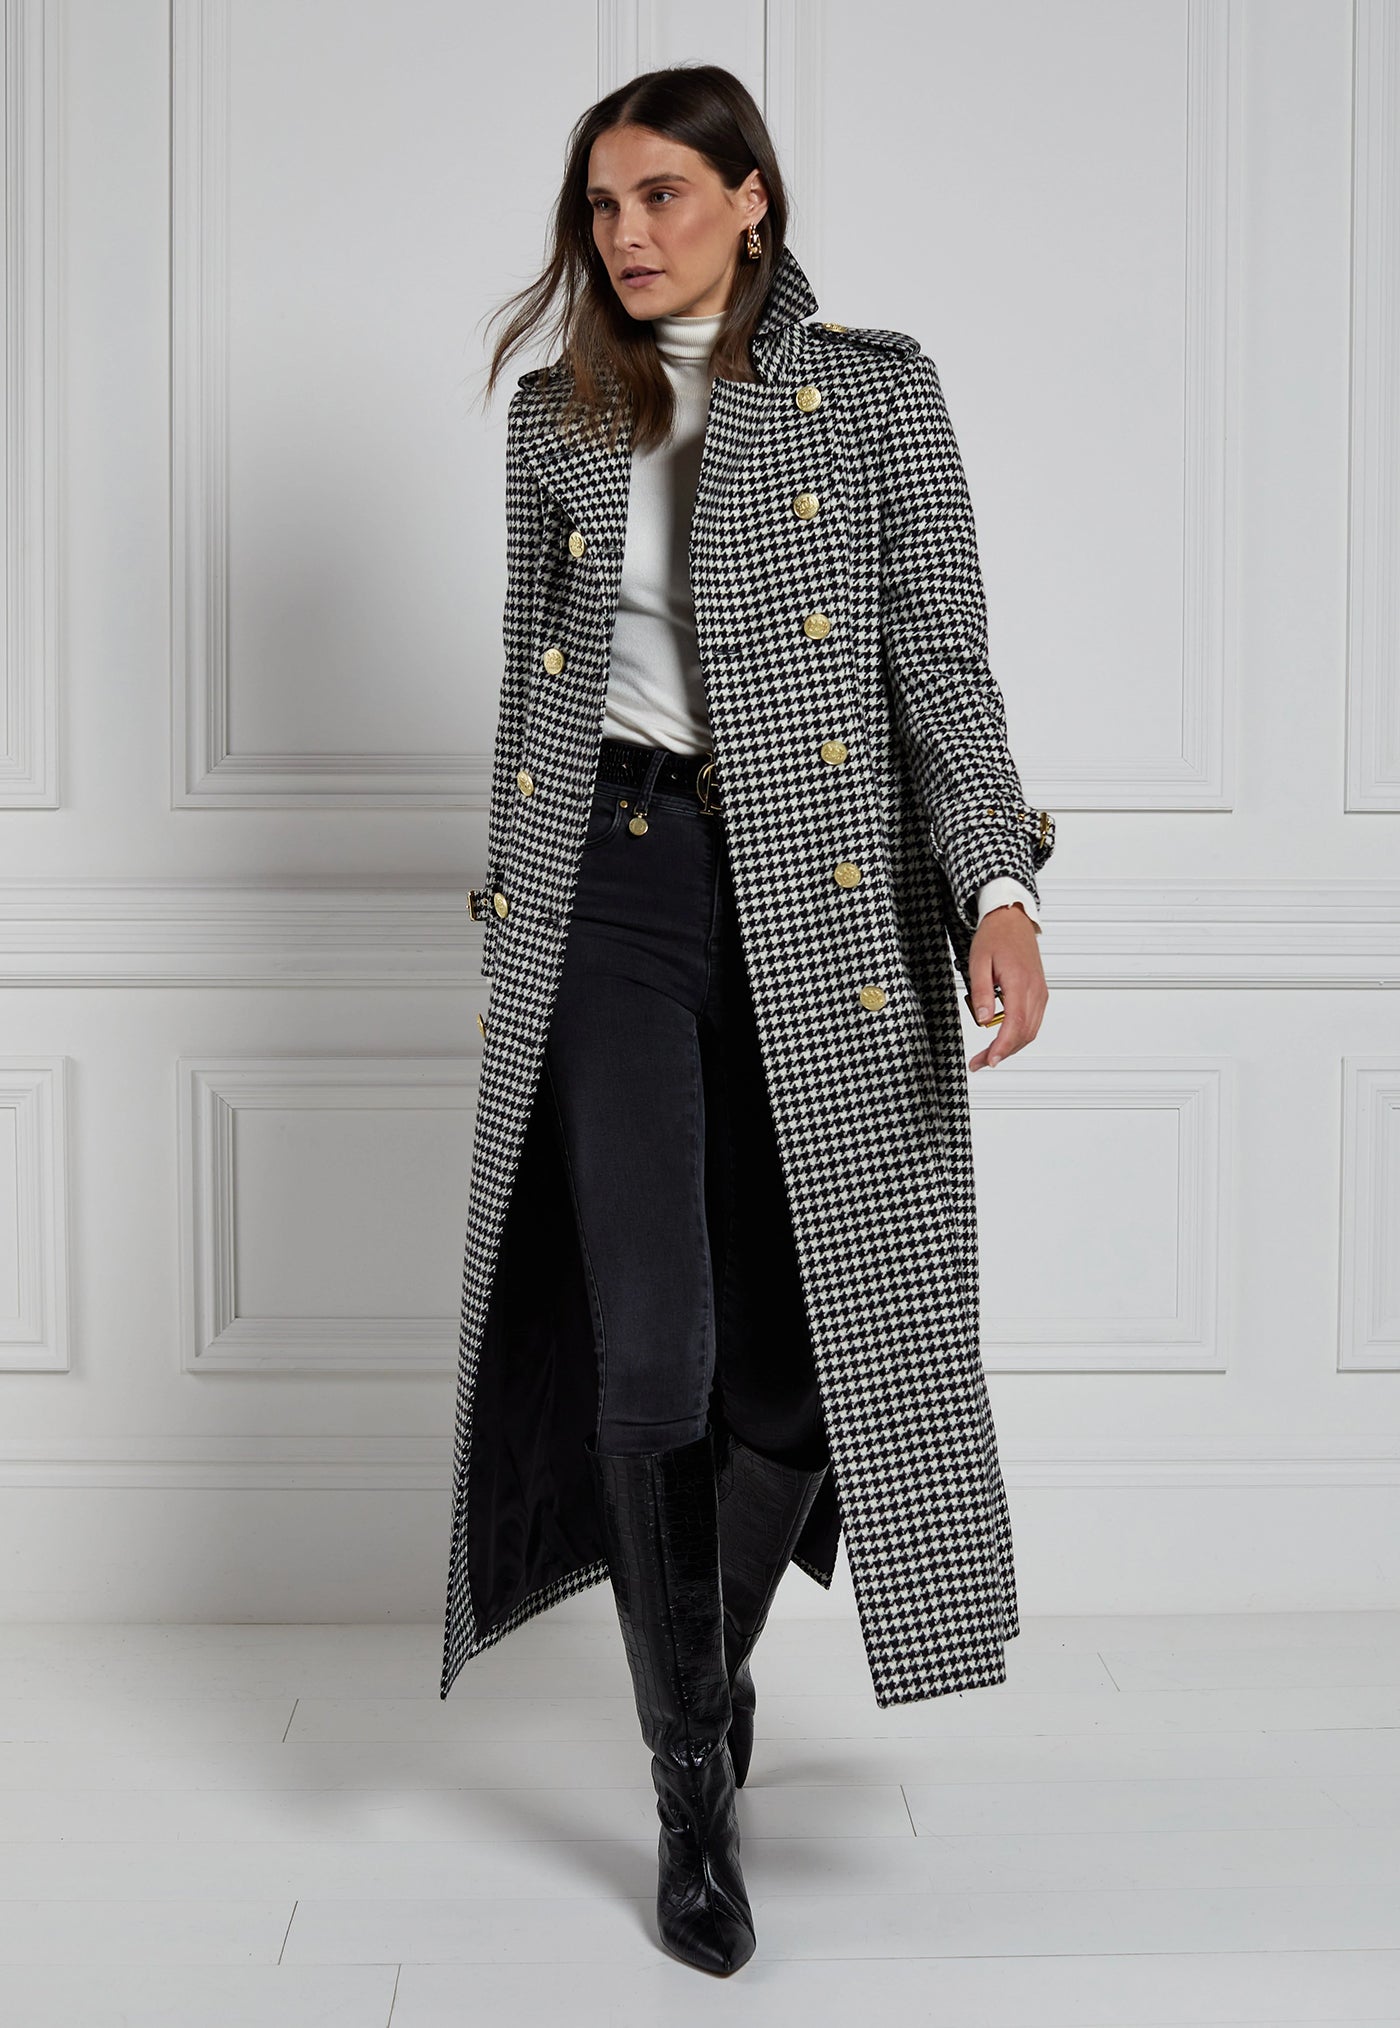 Marlborough Trench Coat Full Length - Houndstooth sold by Angel Divine